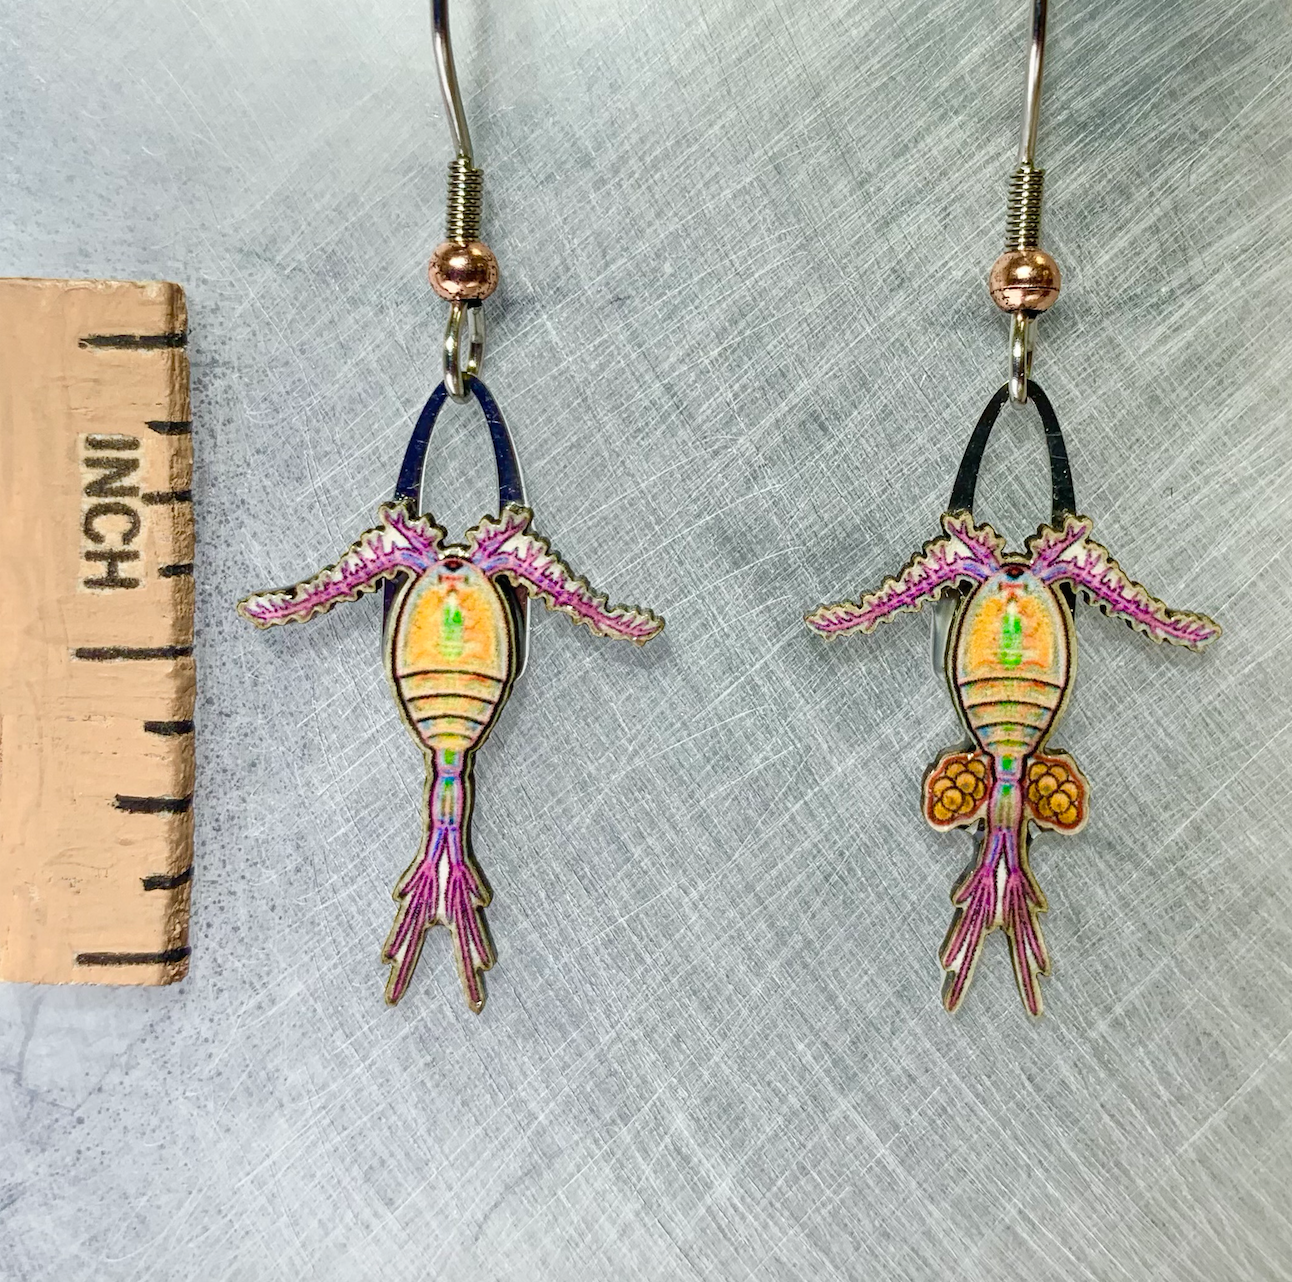 Picture shown is of 1 inch tall pair of earrings of the marine animal the Copepod (Zooplankton).